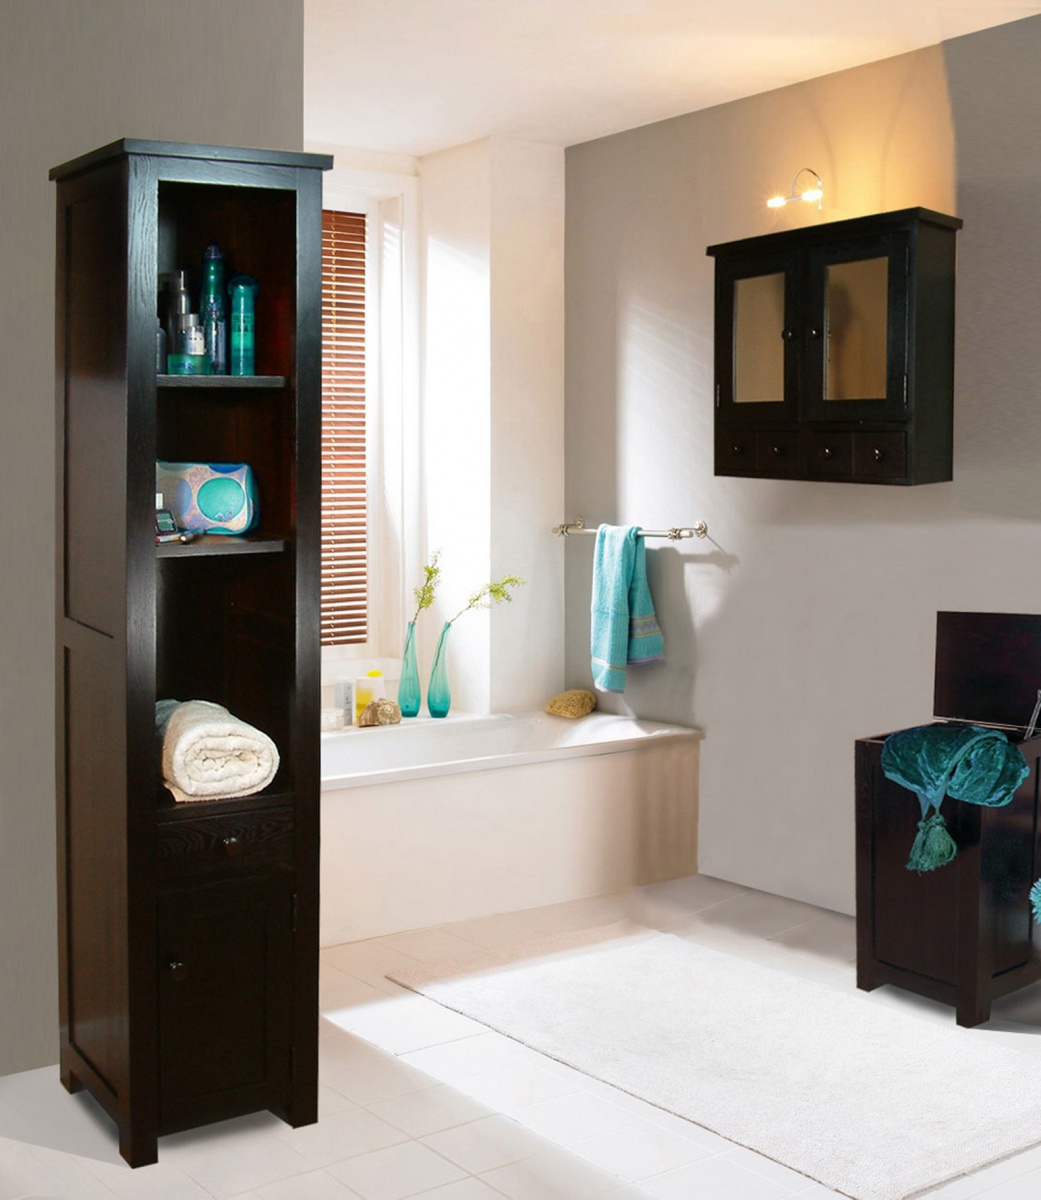 Contemporary Bedroom Furniture Fascinating Contemporary Bedroom With Wooden Furniture Of Bathroom Wall Cabinets Furnished With Vases Flowers On Side Bathtub And Completed With Towel Rack Bathroom The Best Choice For Bathroom: Bathroom Wall Cabinets